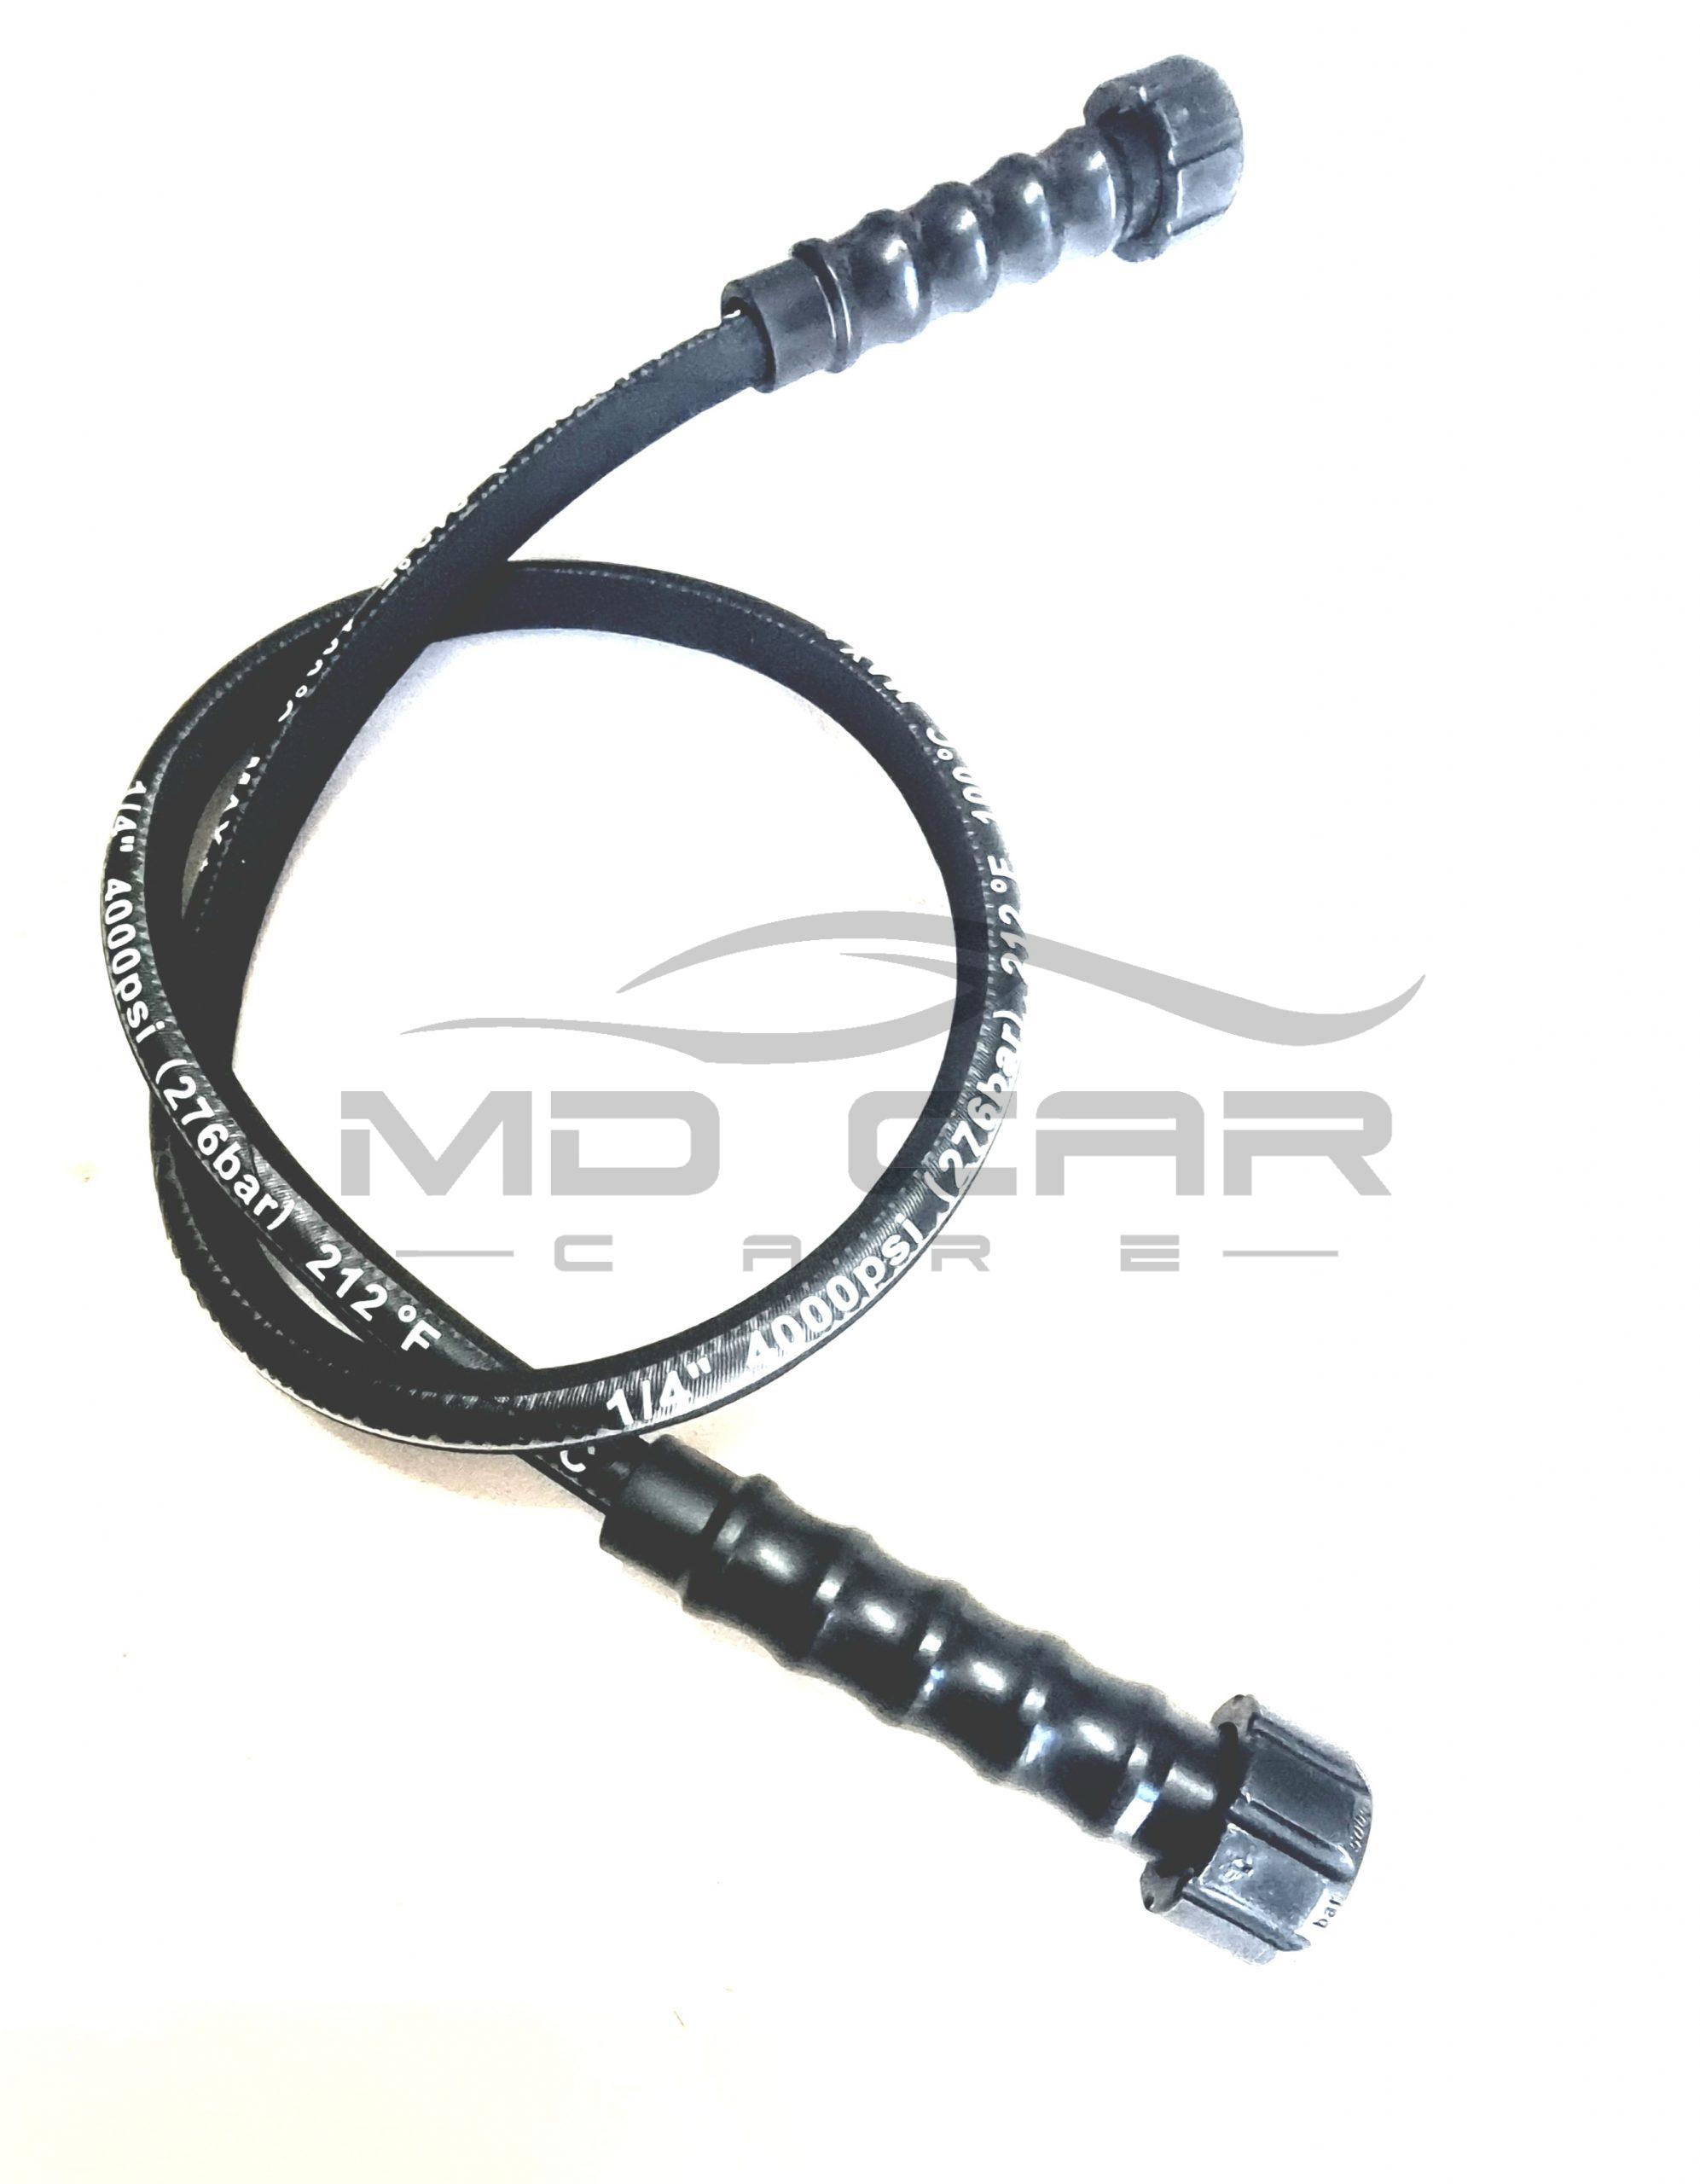 Get Premium Pressure Washer Hoses and Accessories Online - MD Car Care